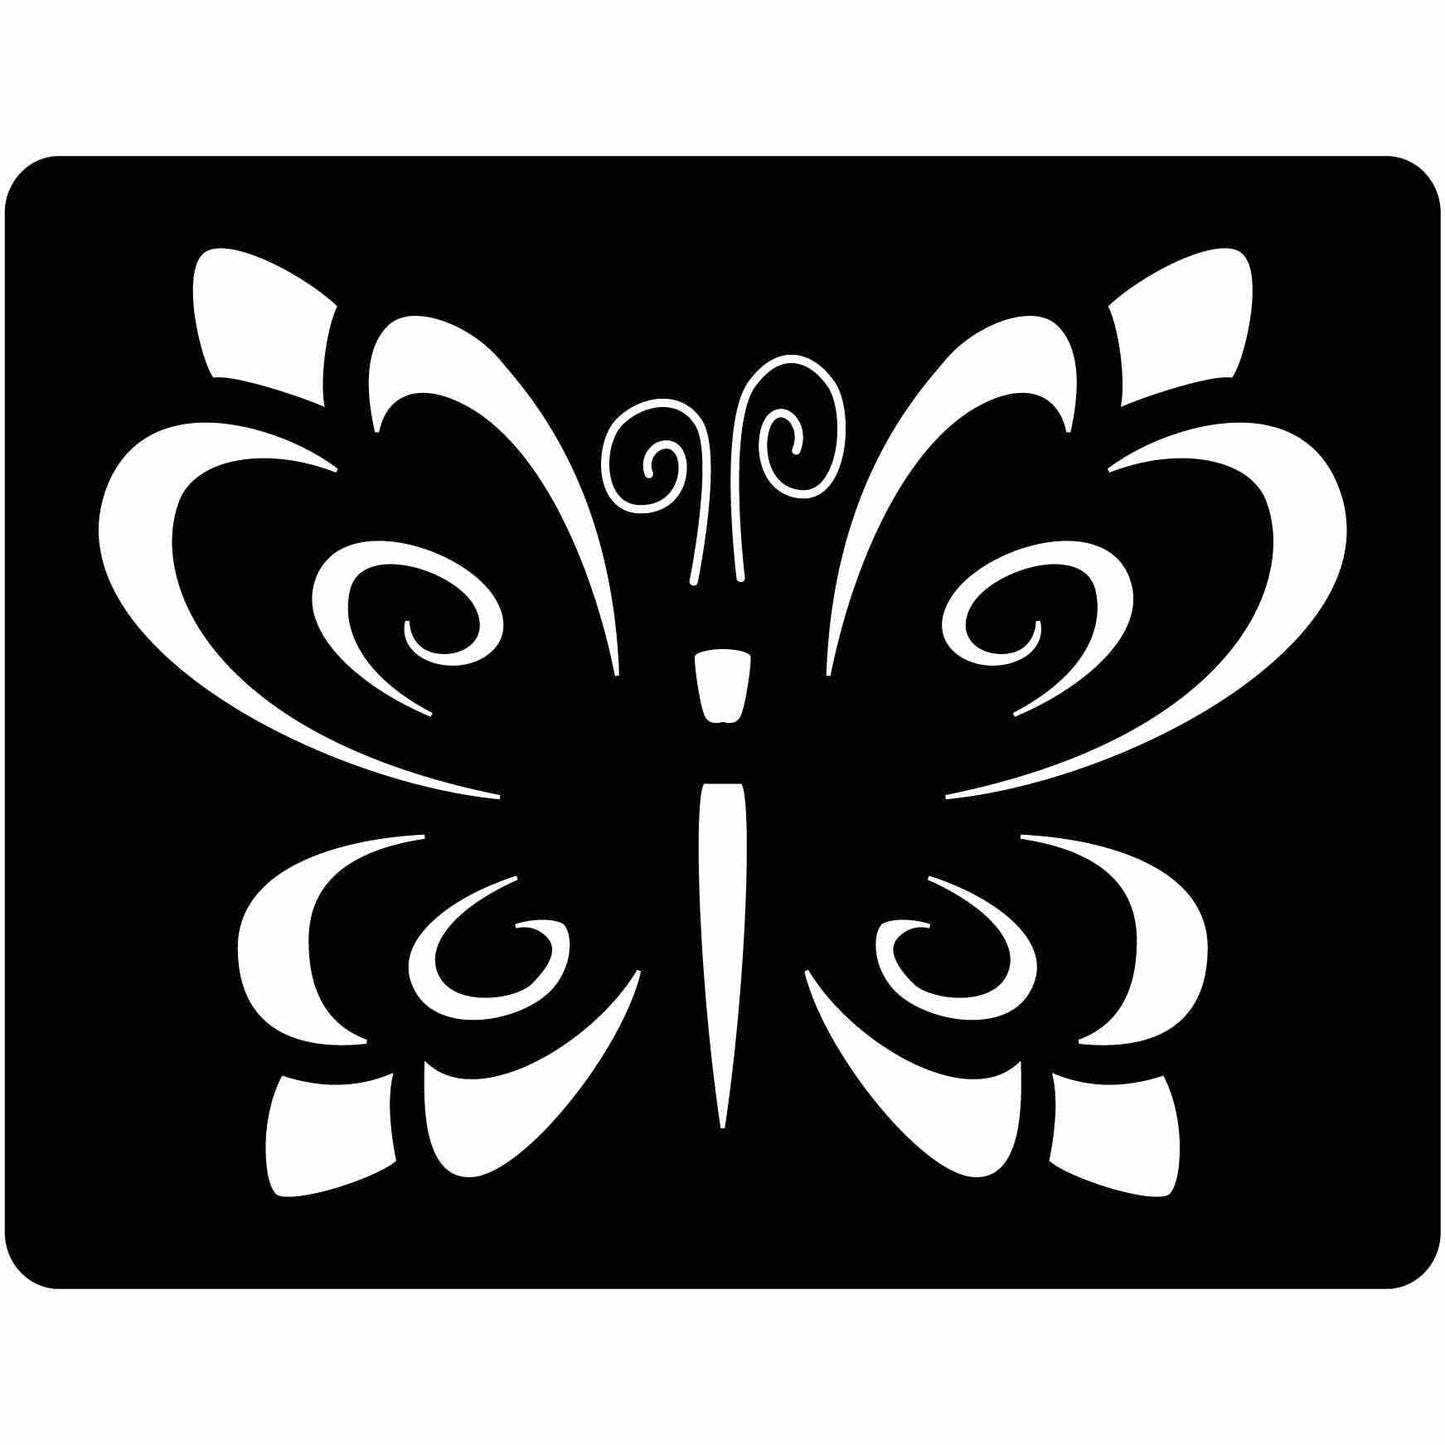 Butterfly Ornaments Decor - Free DXF files Cut Ready CNC Designs